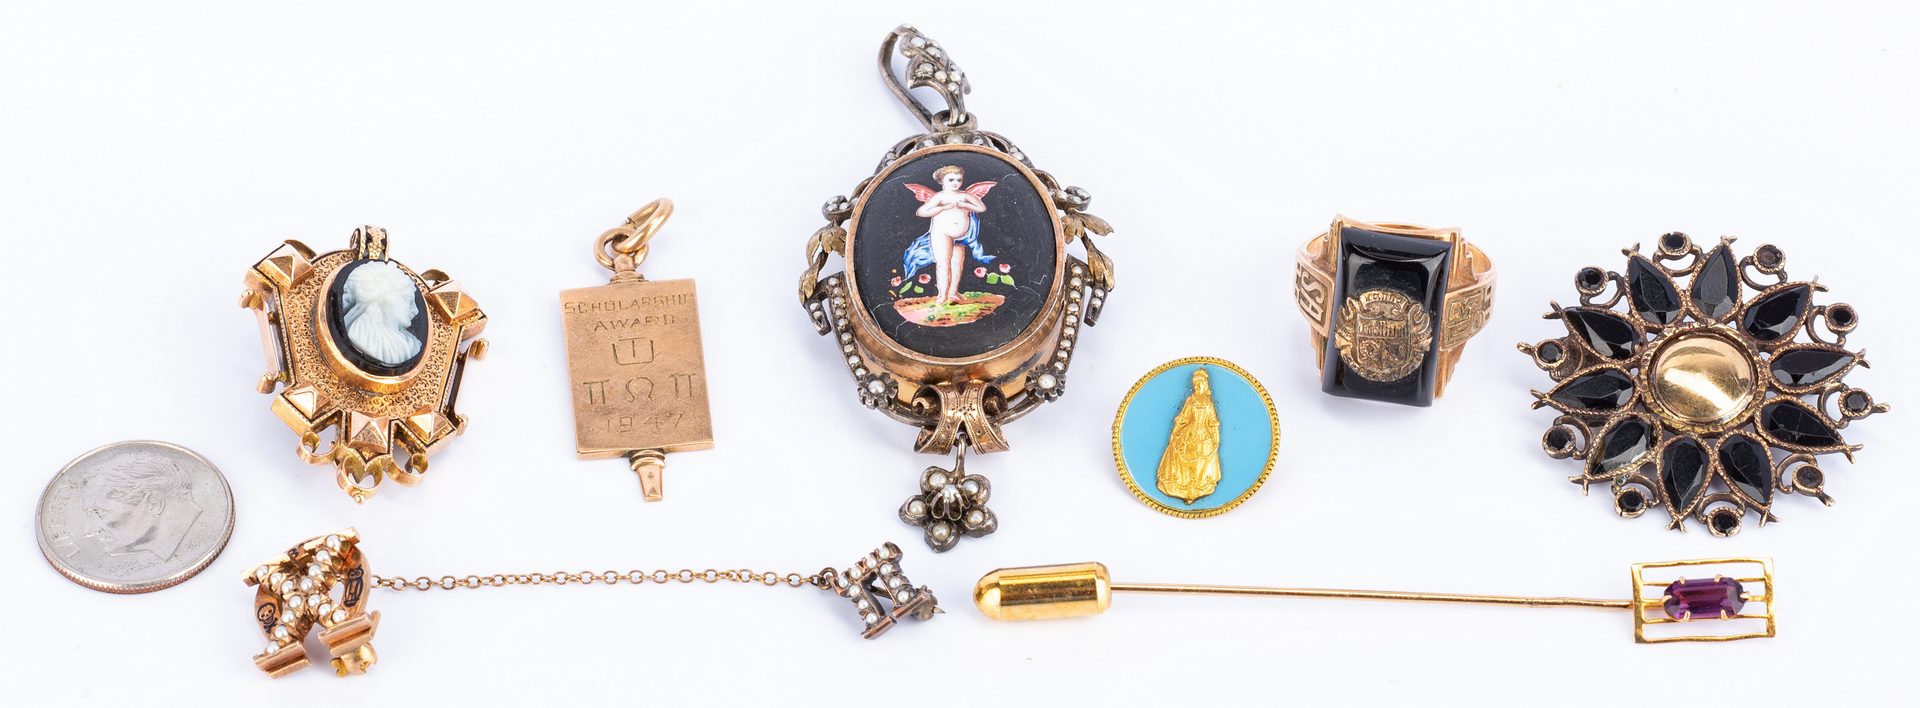 Lot 54: Group Victorian and Vintage Jewelry, 8 items